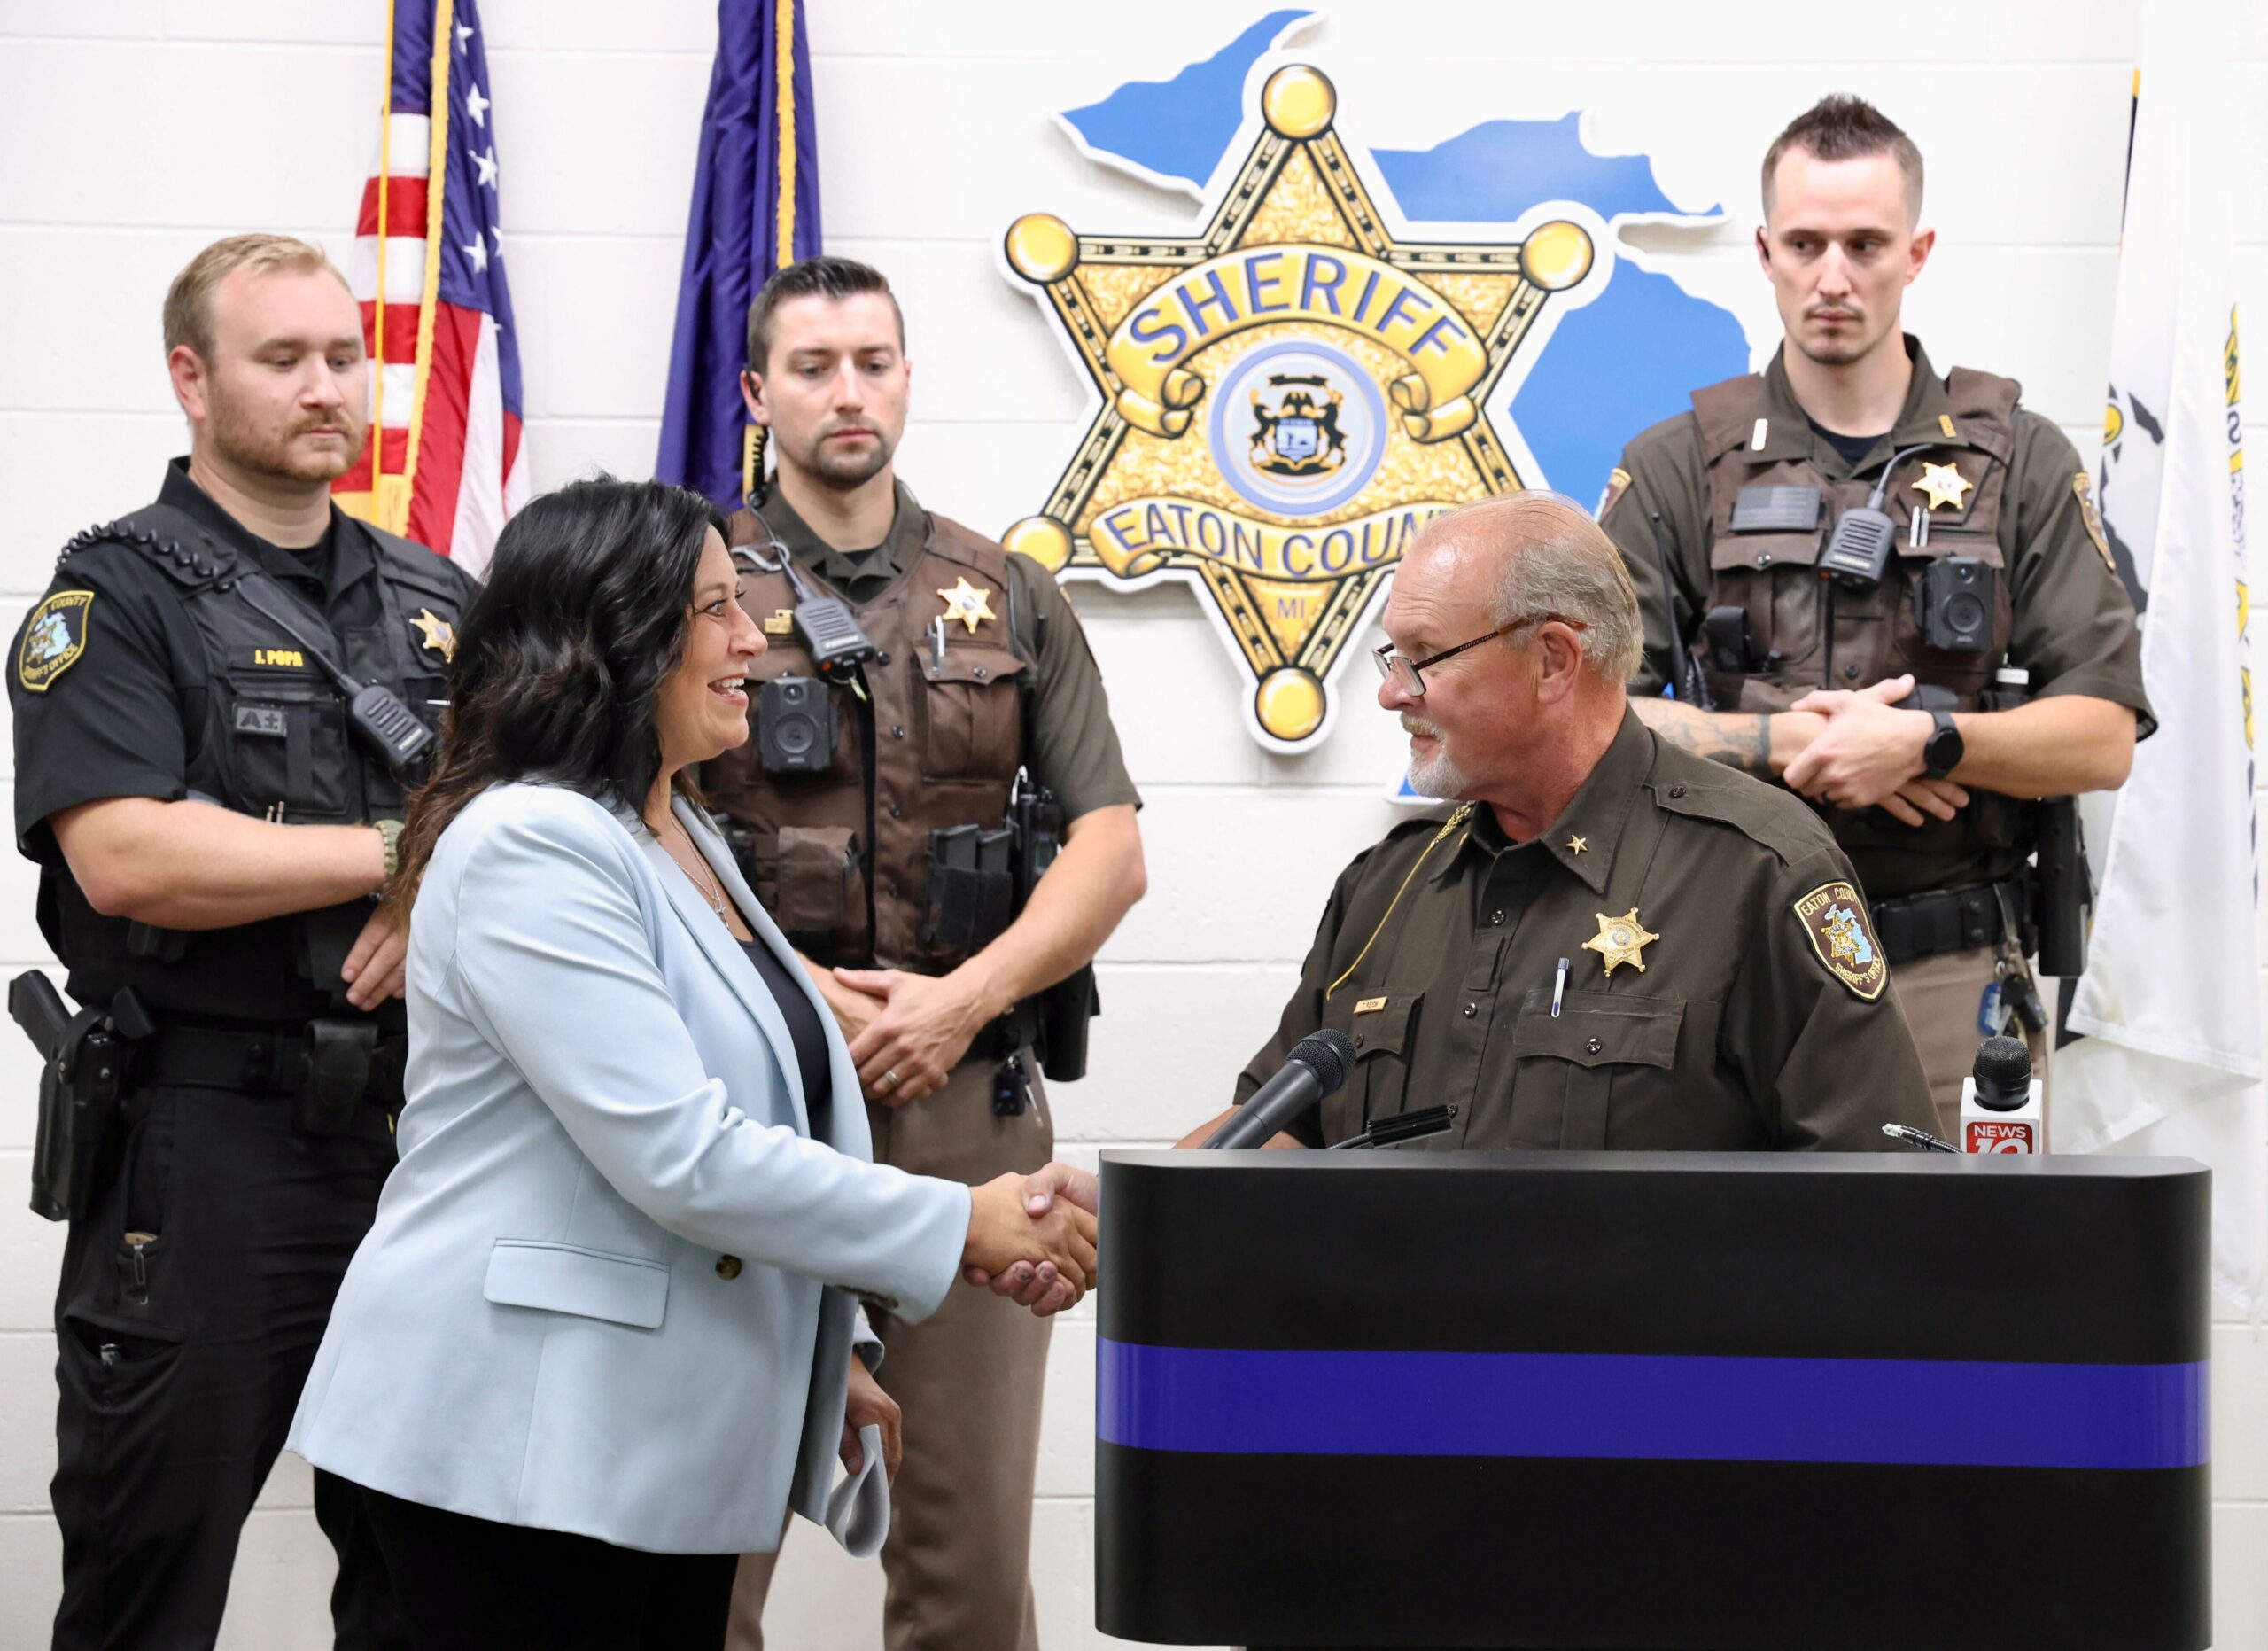 State Rep. Angela Witwer (Delta Township) shakes the hand of Eaton County Sheriff Tom Reich during a press conference to discuss investments in public safety at the Eaton County Sheriff's Office.